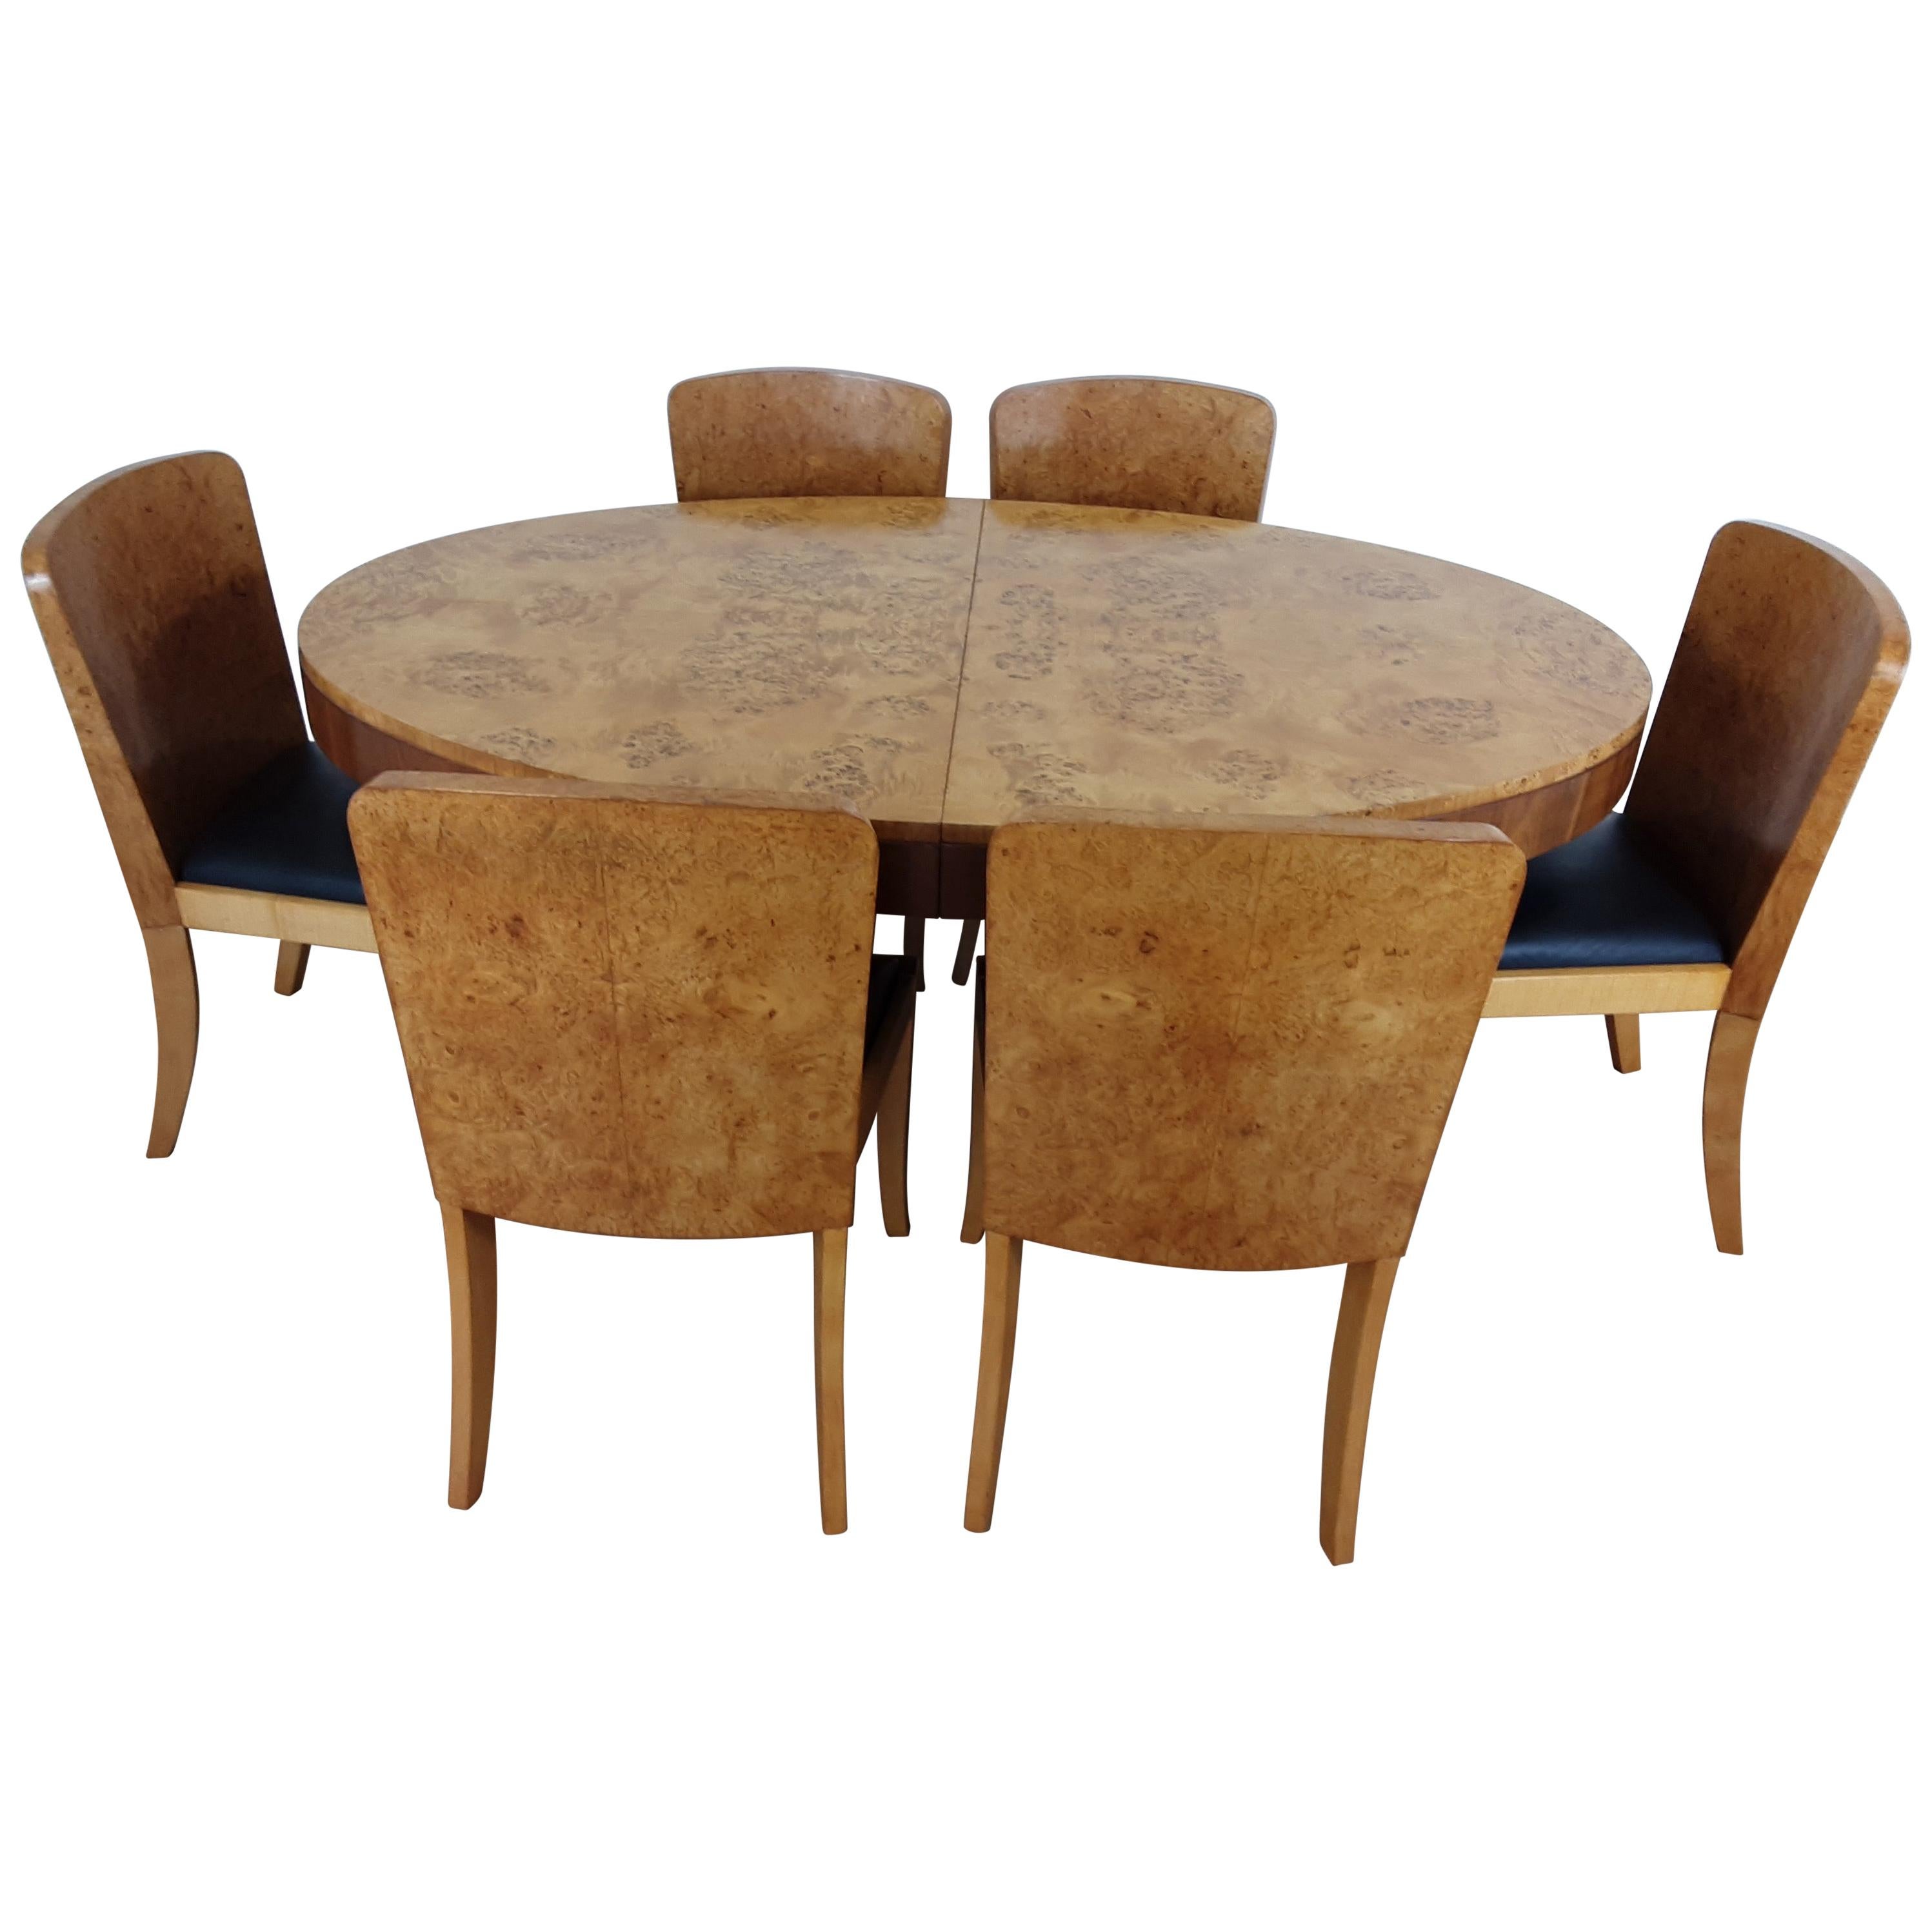 British Art Deco Extendable Dining Table and Chairs in Birdseye Maple by Hille For Sale